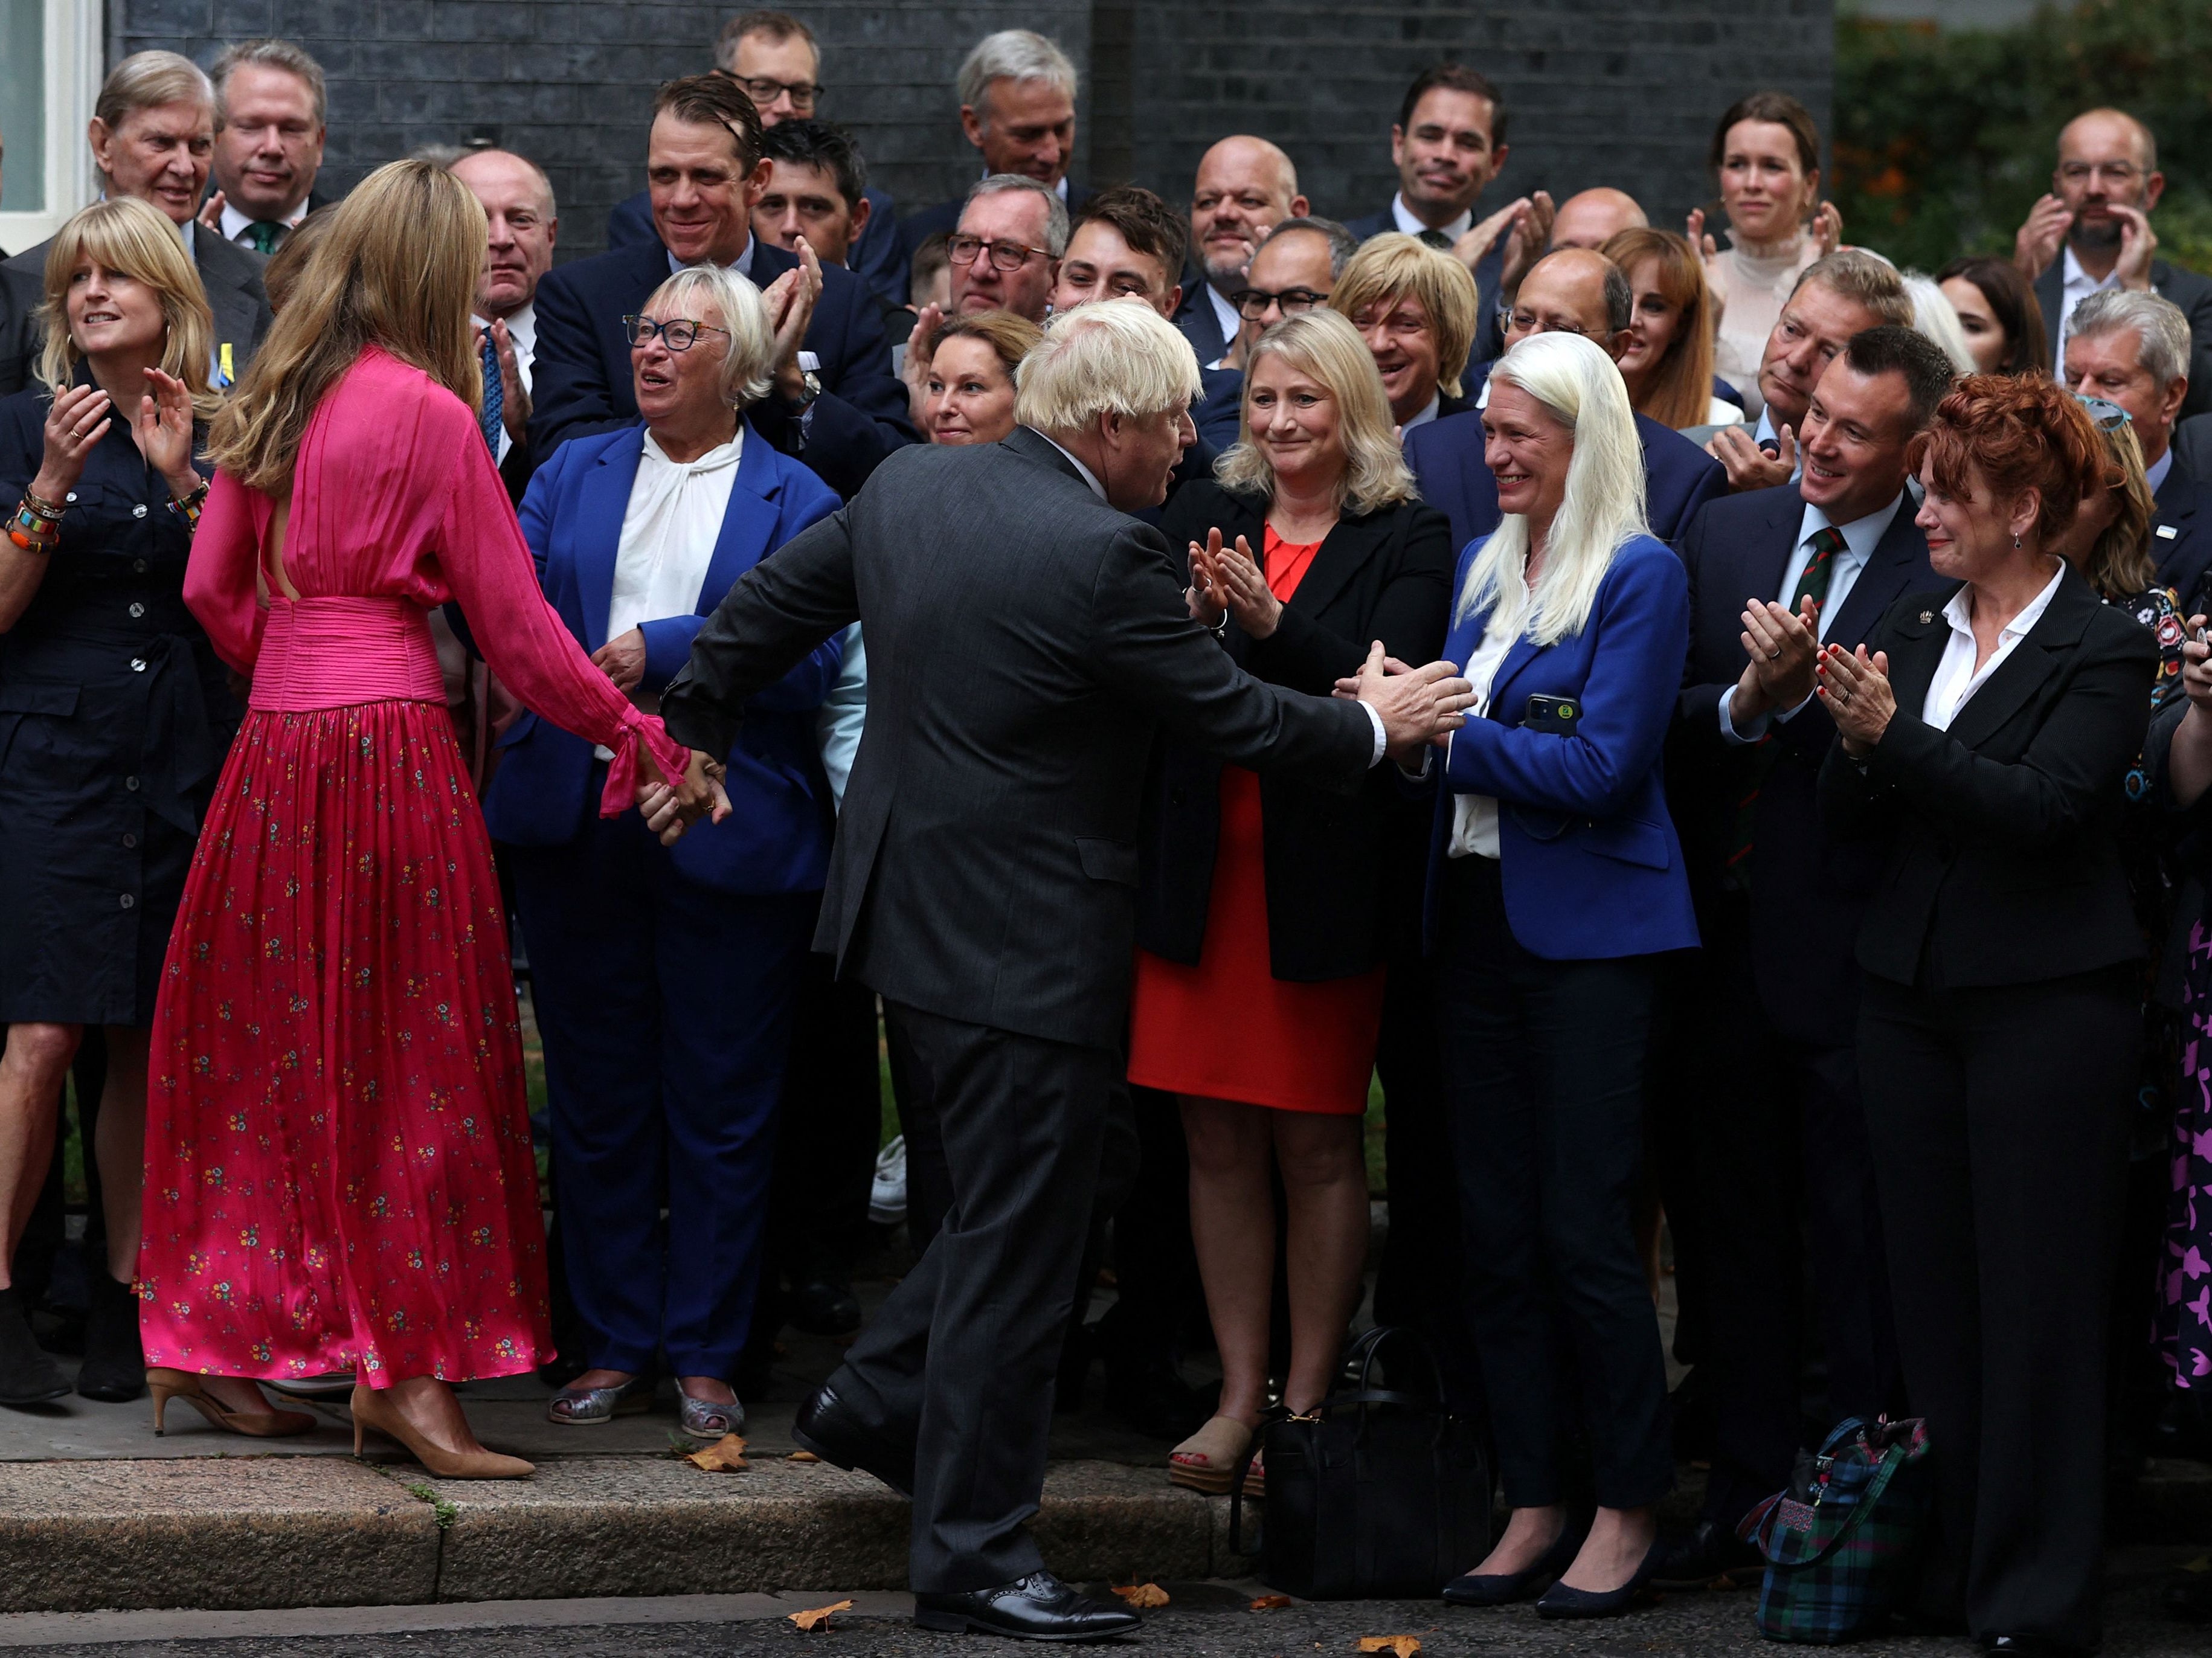 Boris Johnson and his wife Carrie say goodbye to the crowd